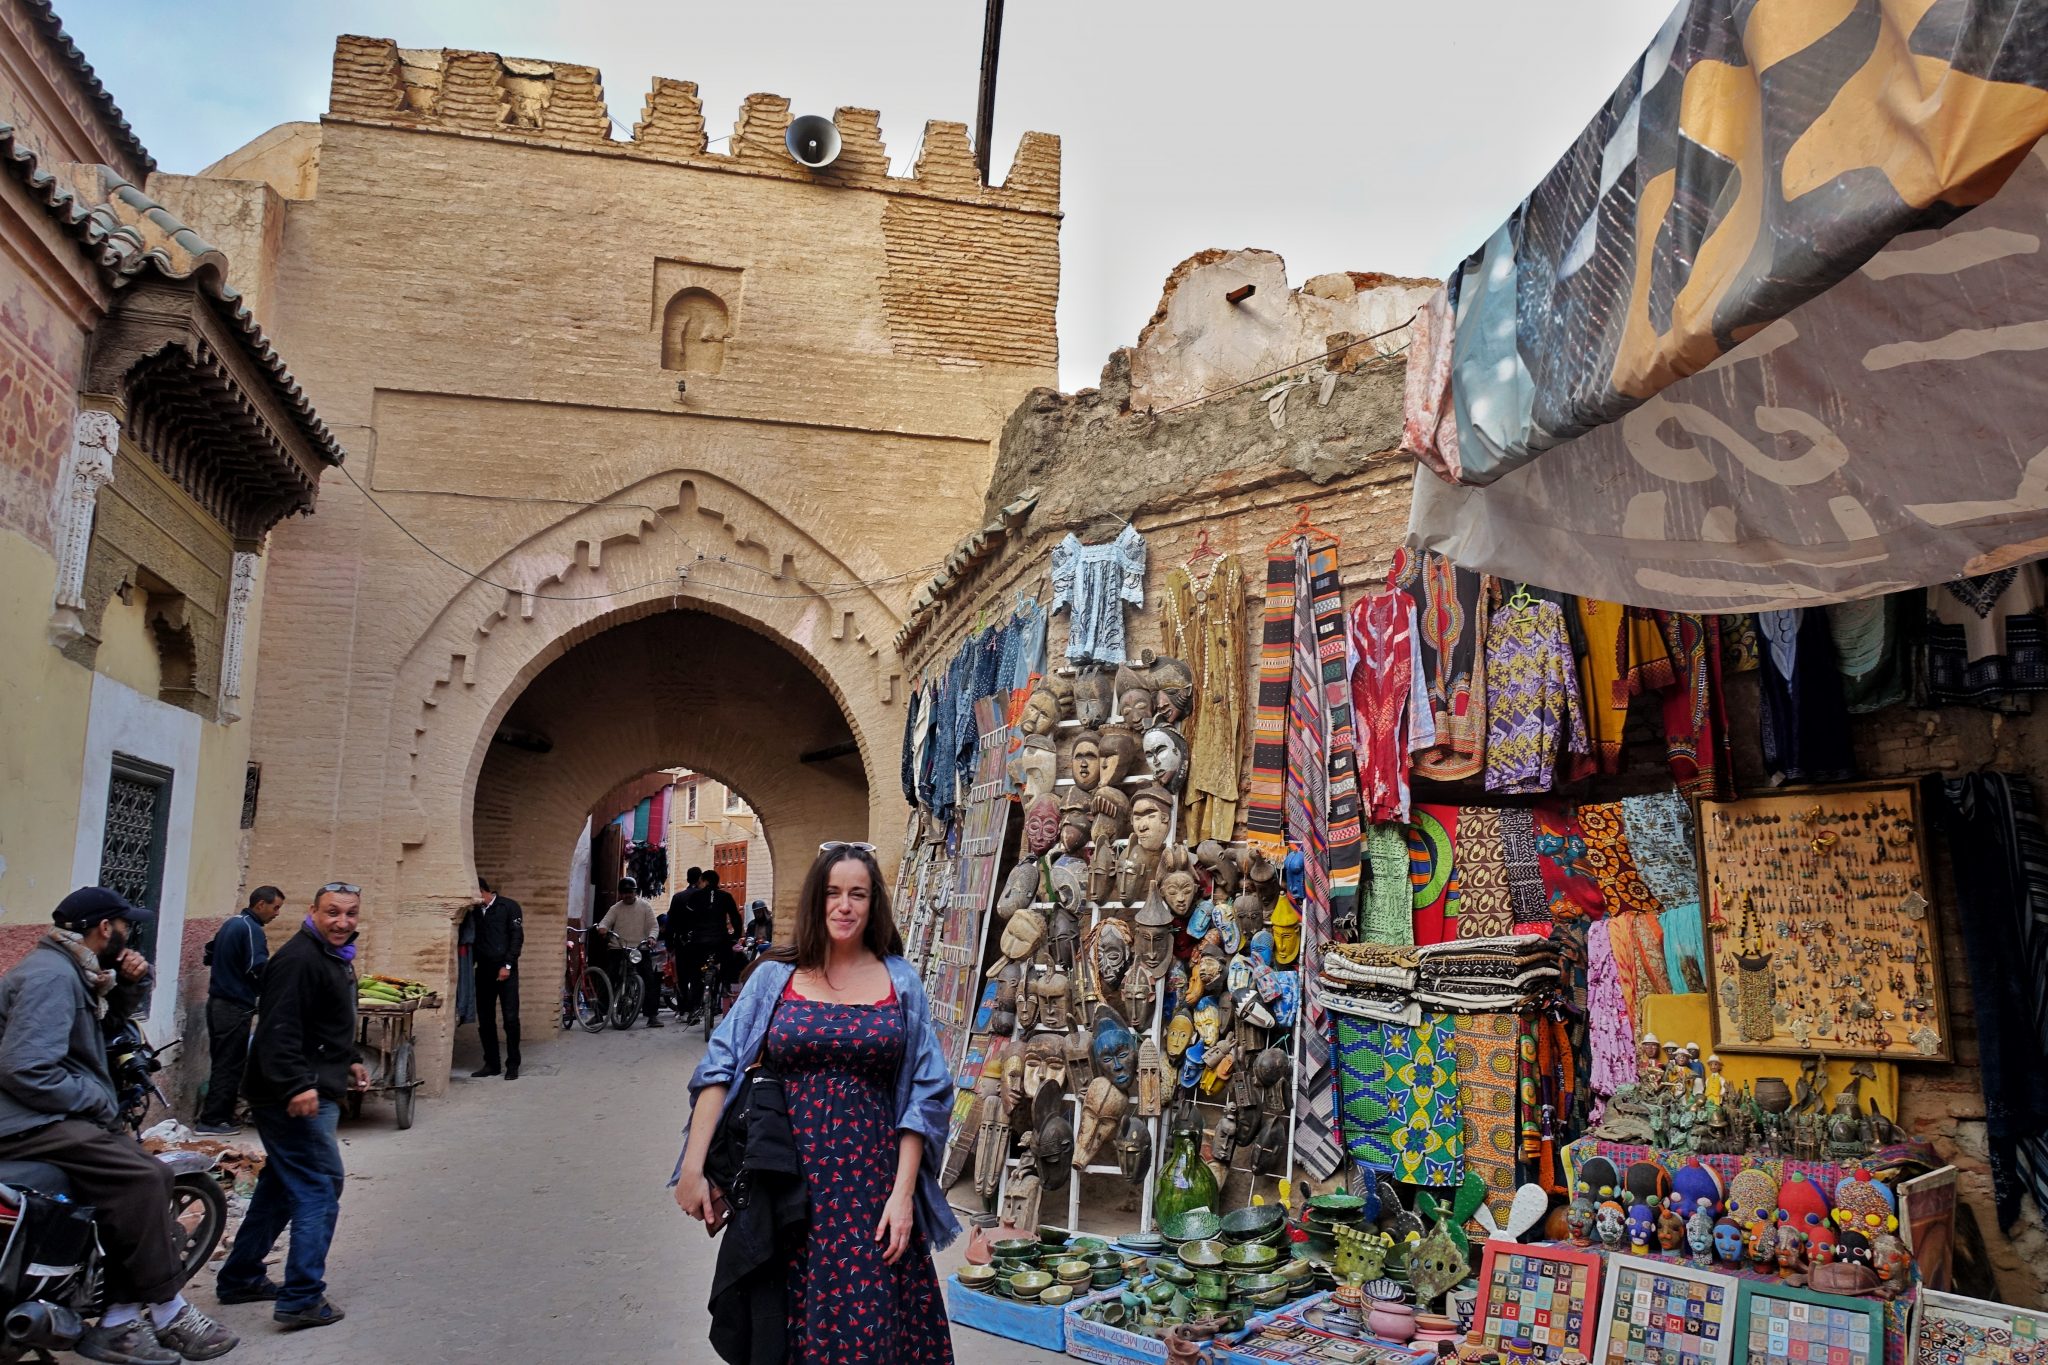 Pilar at the Marrakech old Medina and some colorful stalls selling clothes and African carved statues